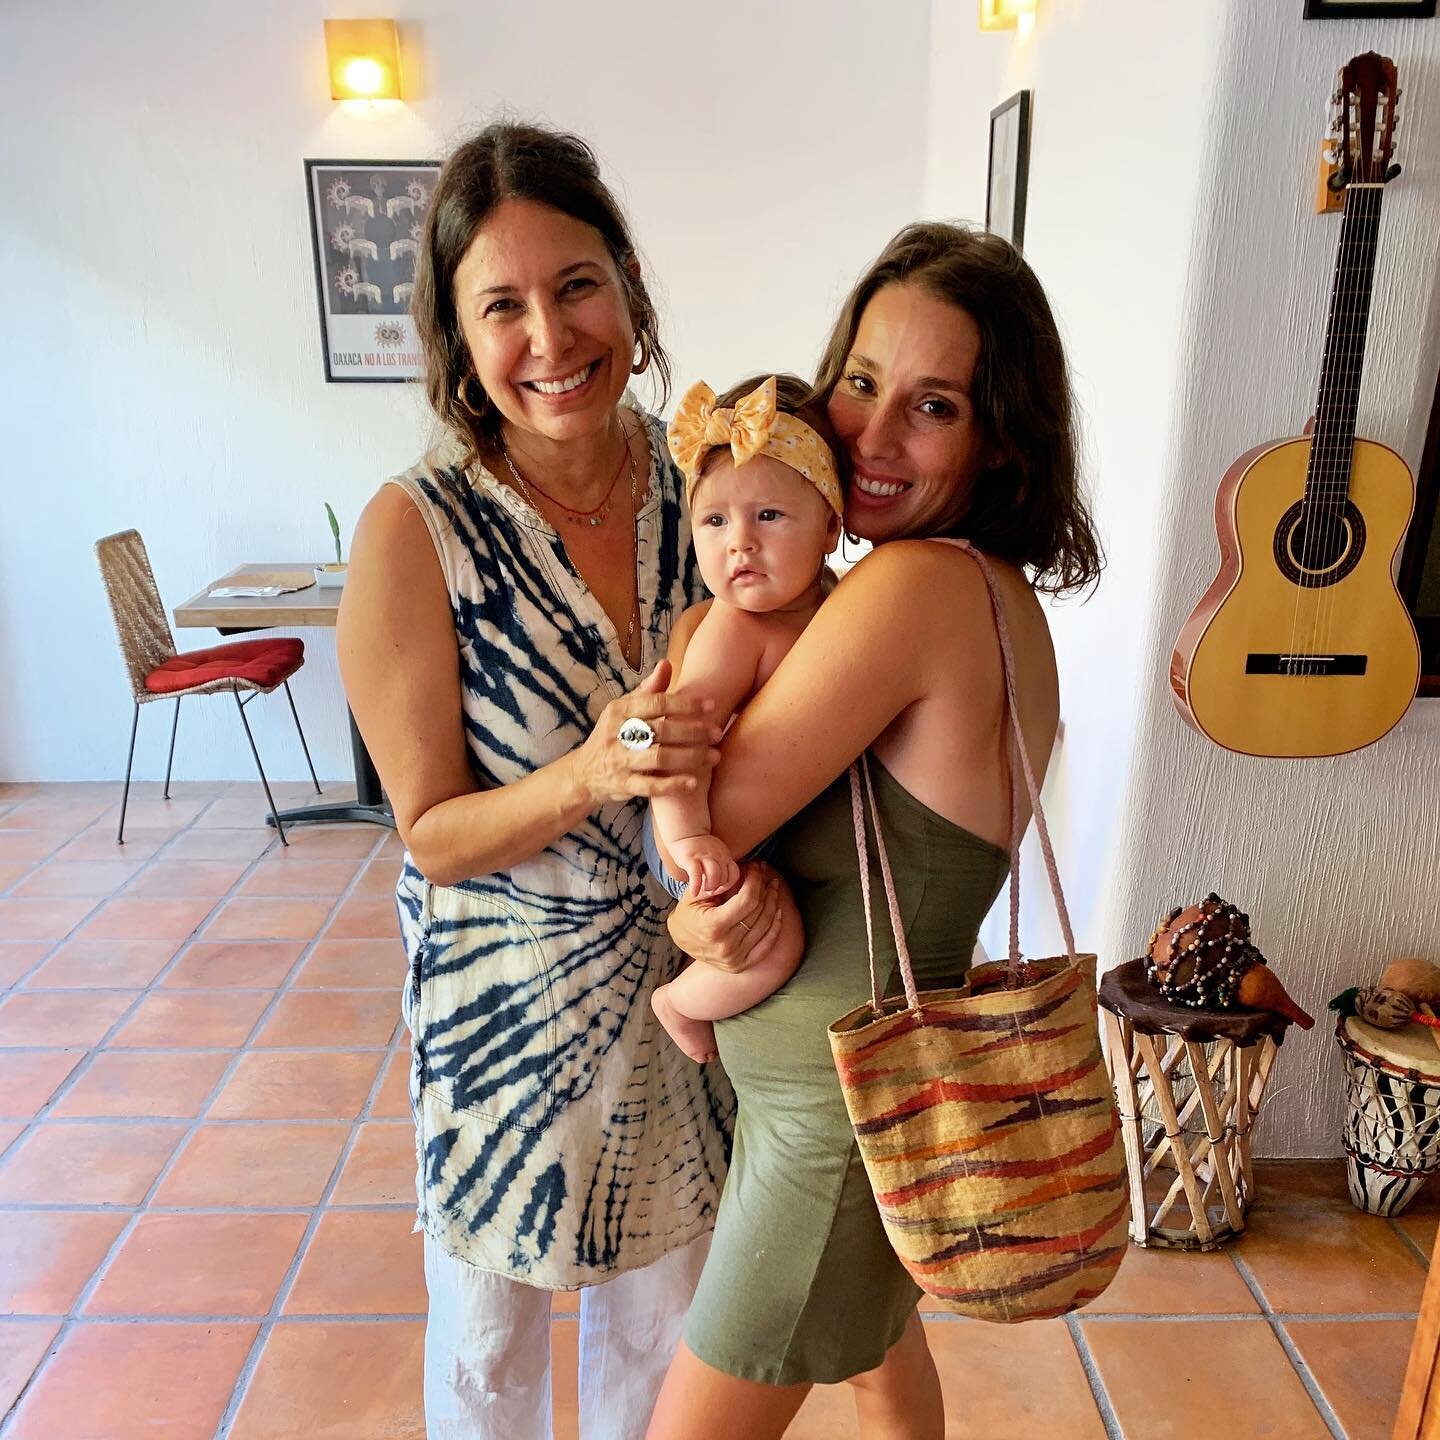 Our dear friends graced the bistro this morning with their beautiful daughter. #sanpancho #sanpanchonayarit #rivieranayarit